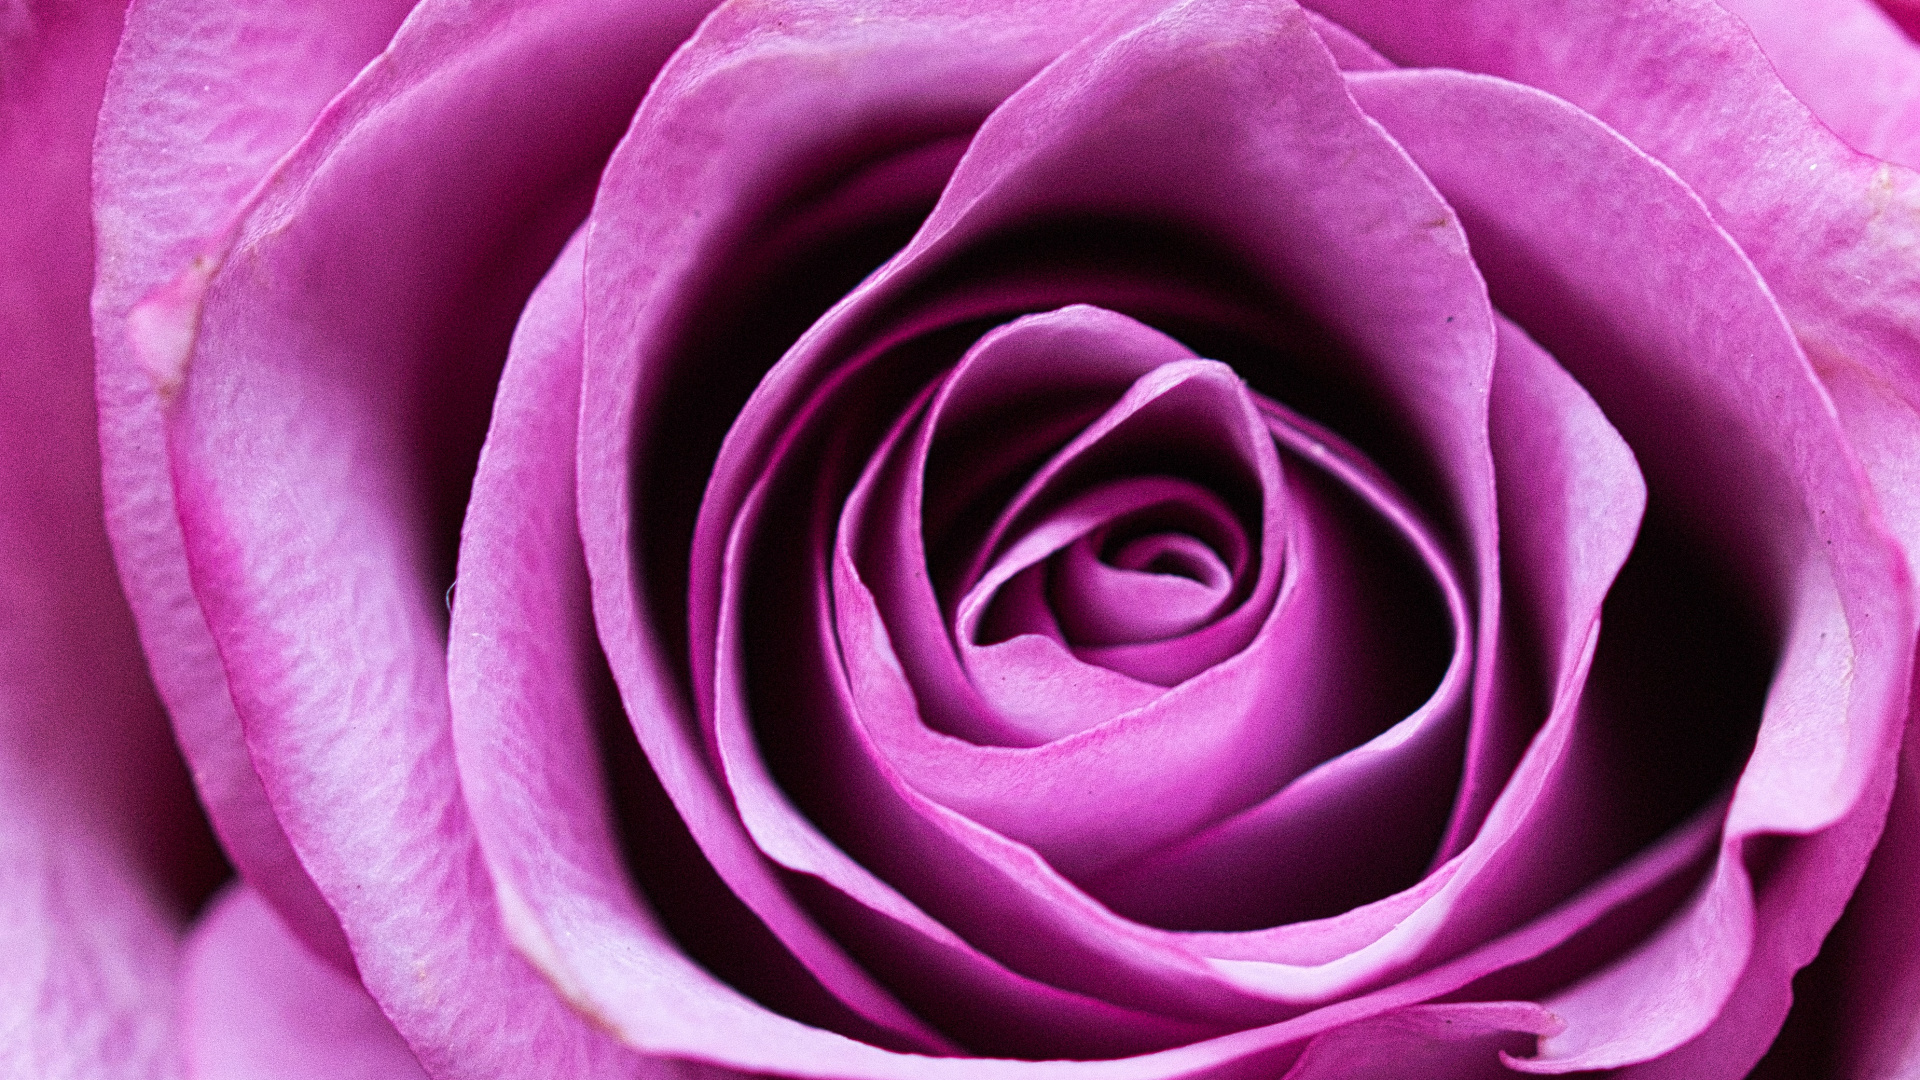 Pink Rose in Close up Photography. Wallpaper in 1920x1080 Resolution